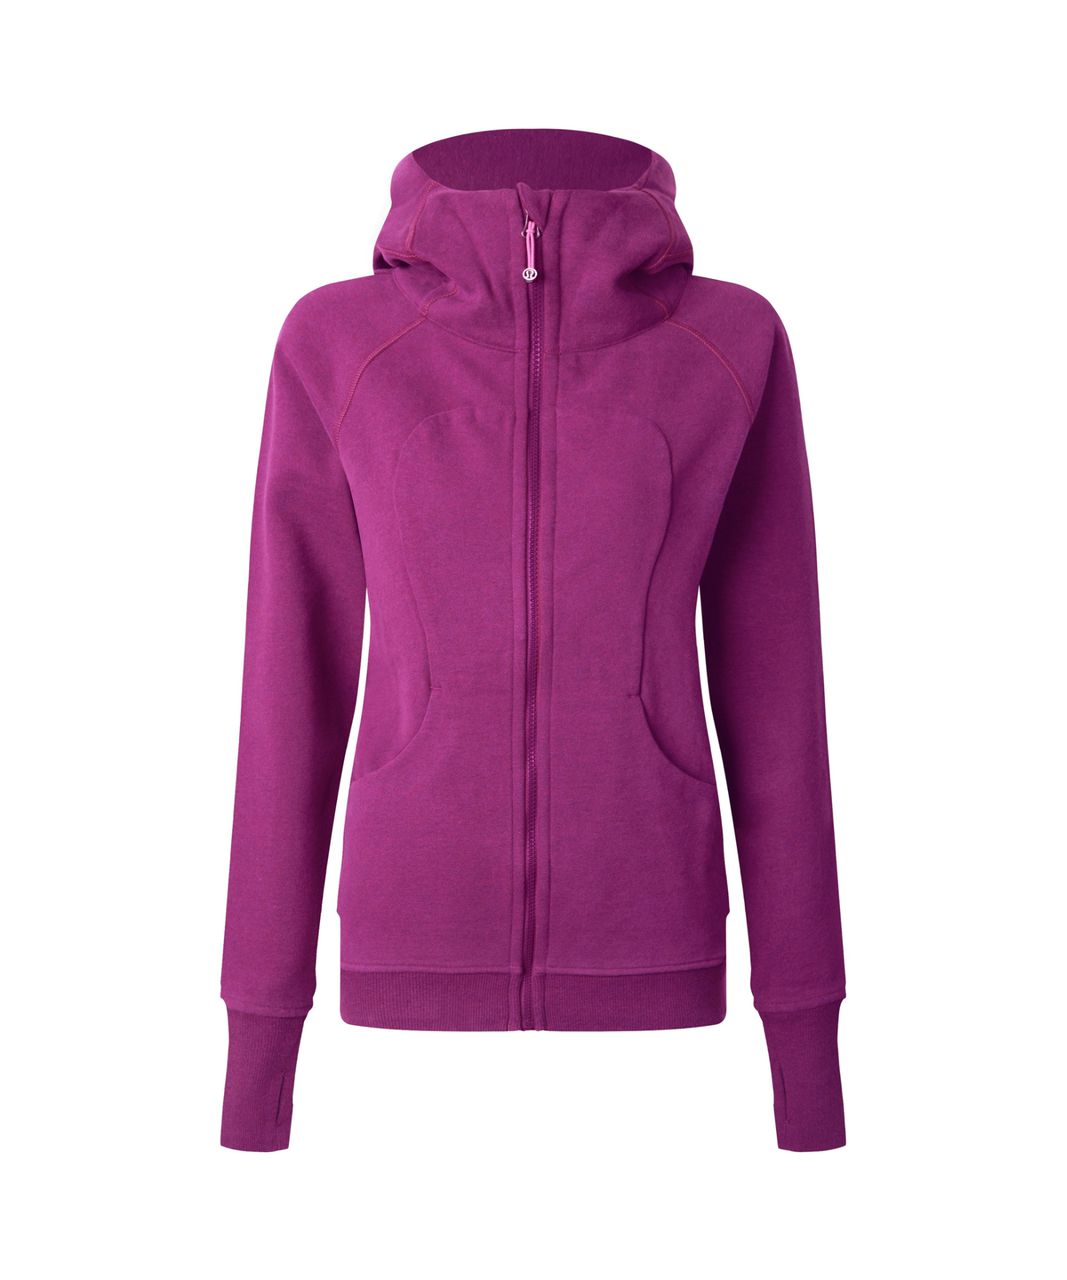 Buy the Lululemon Limited Special Edition Scuba Hoodie Pink/Plum